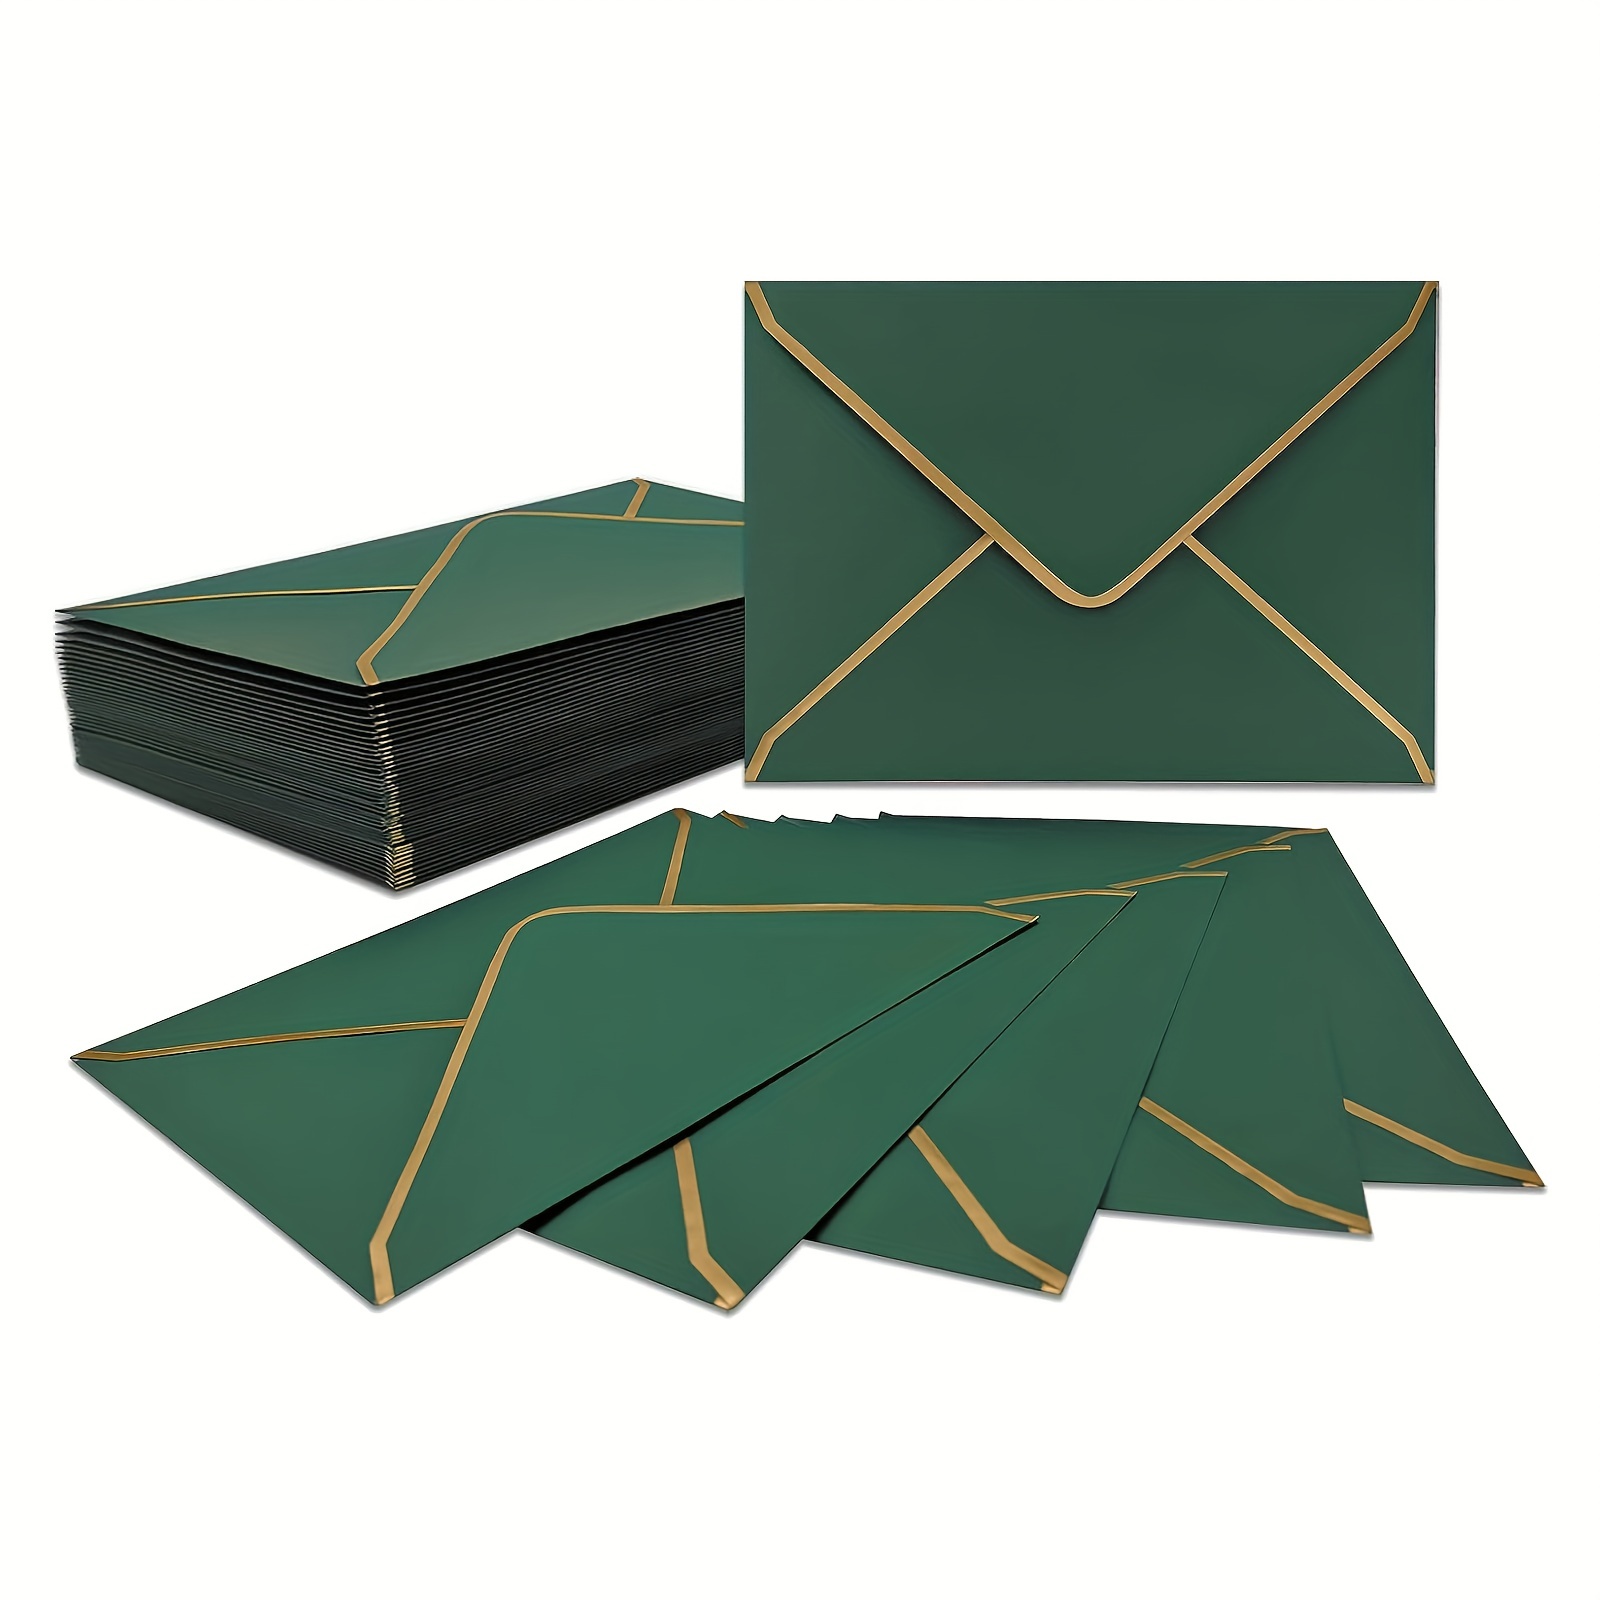 Discount A7 Envelopes for enclosing your 5x7 invitations and cards